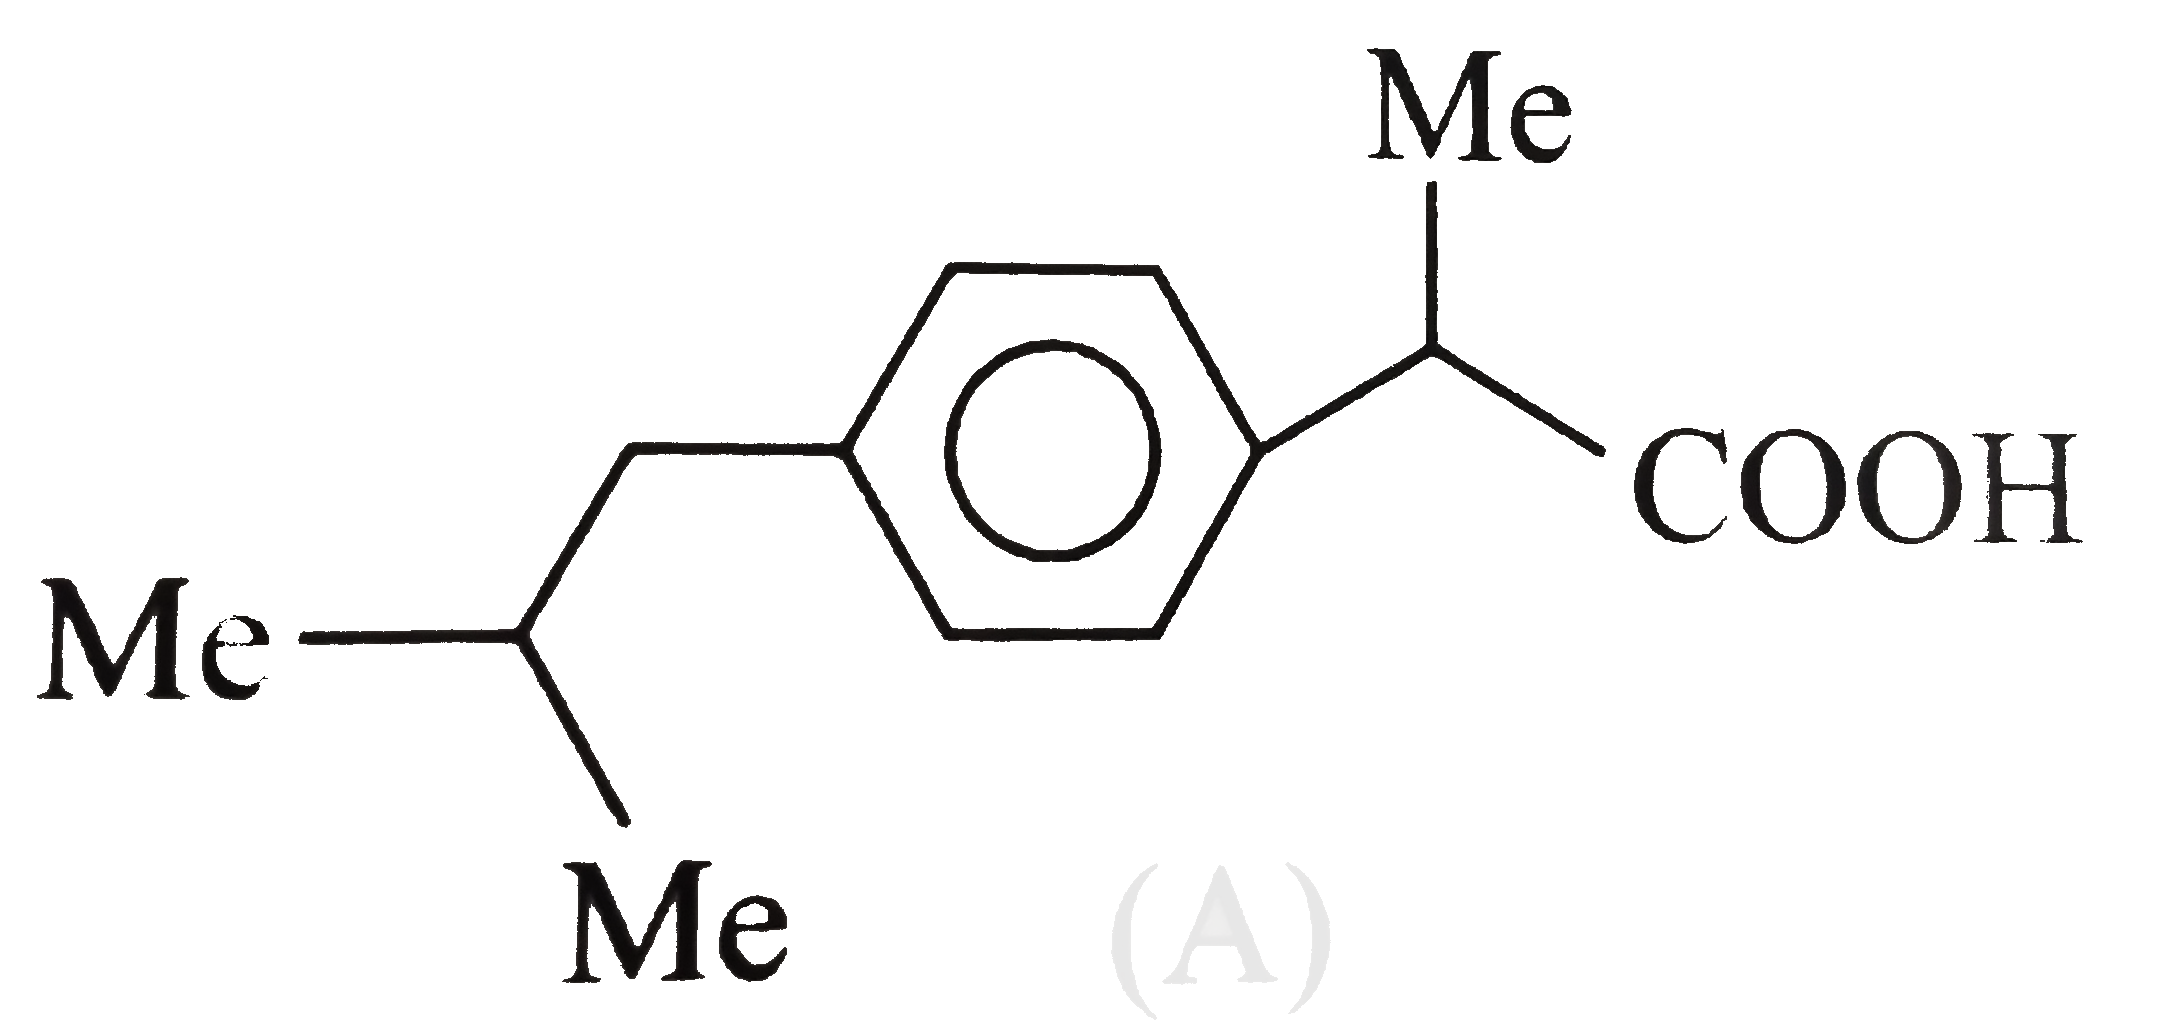 The analgesic drug ibuprofen (A) is chiral and exists in (+) and (-) froms. One enantiomer is physiologically active, while the other is inactive. The other is inactive. The structure of ibuprofen is given below.      The principal functional group in (A) is: